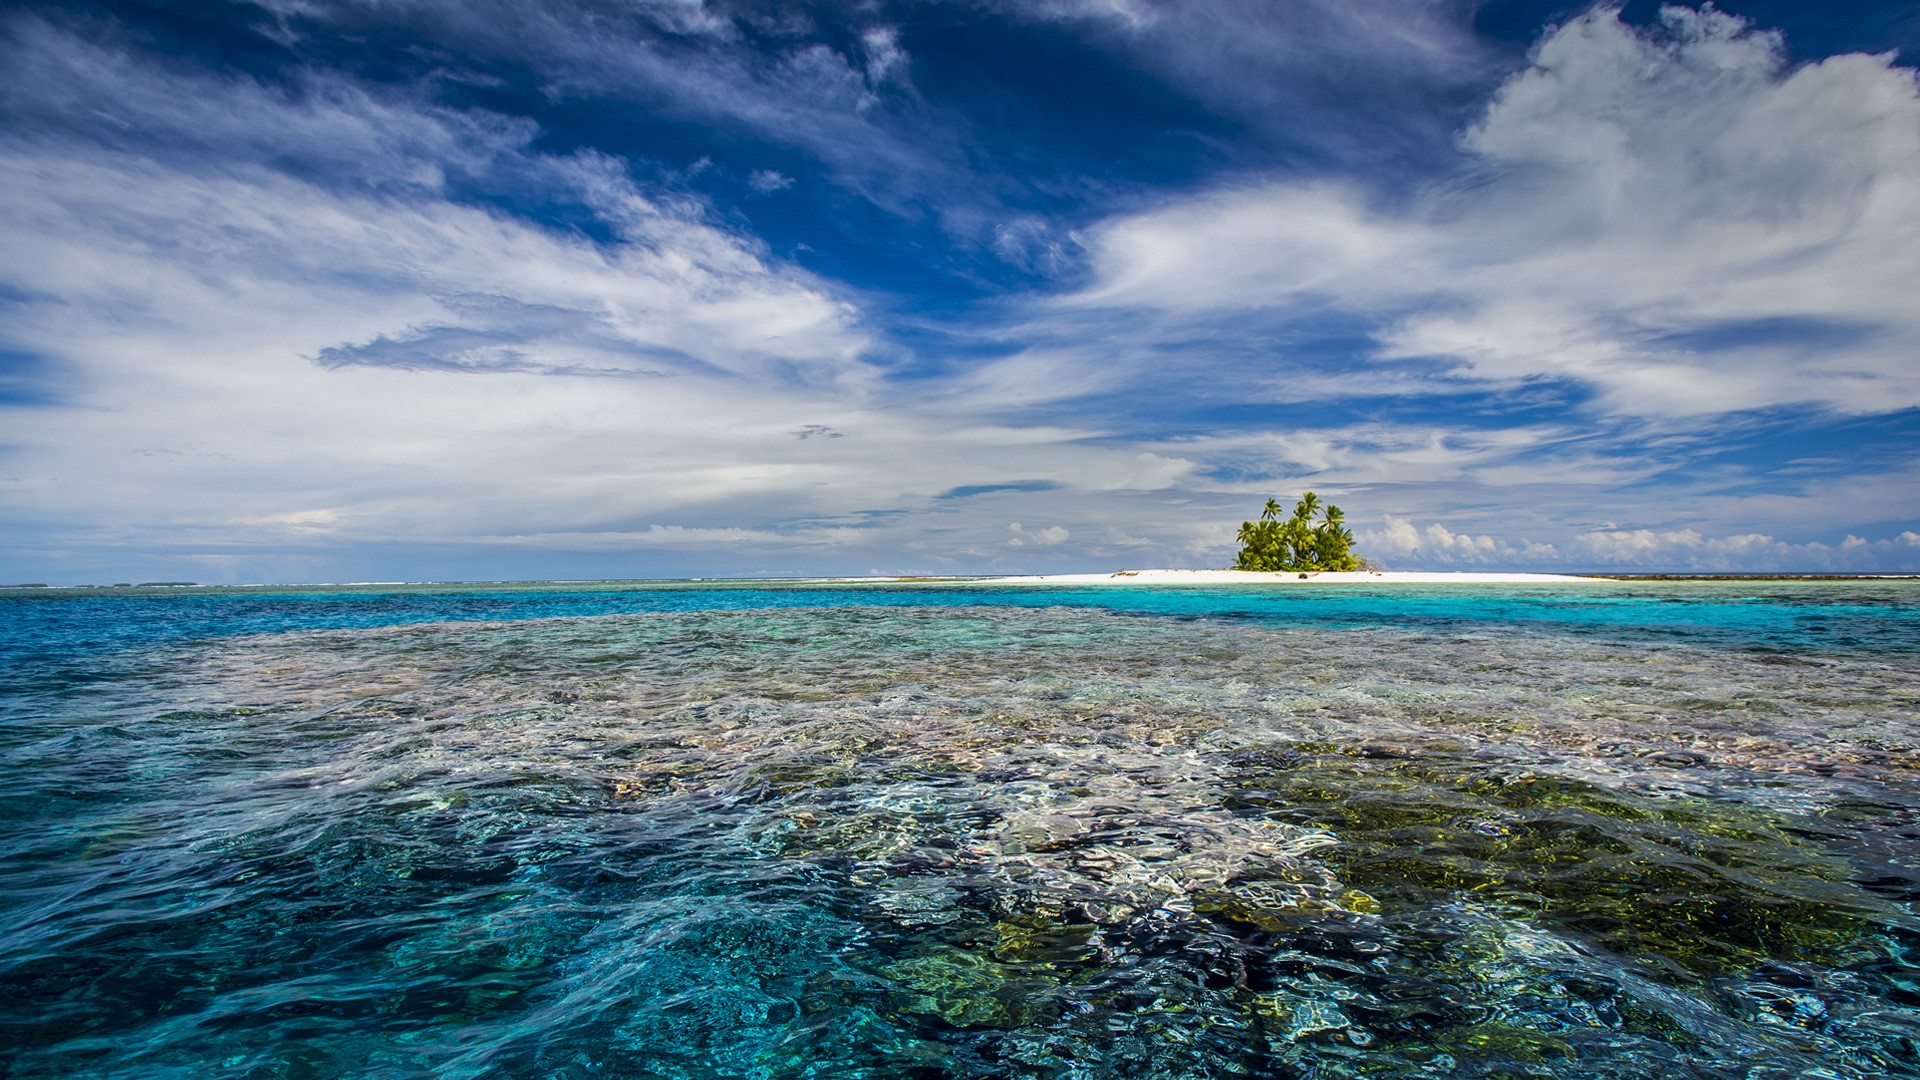 Download The Little Island Of Tuvalu Wallpaper | Wallpapers.com